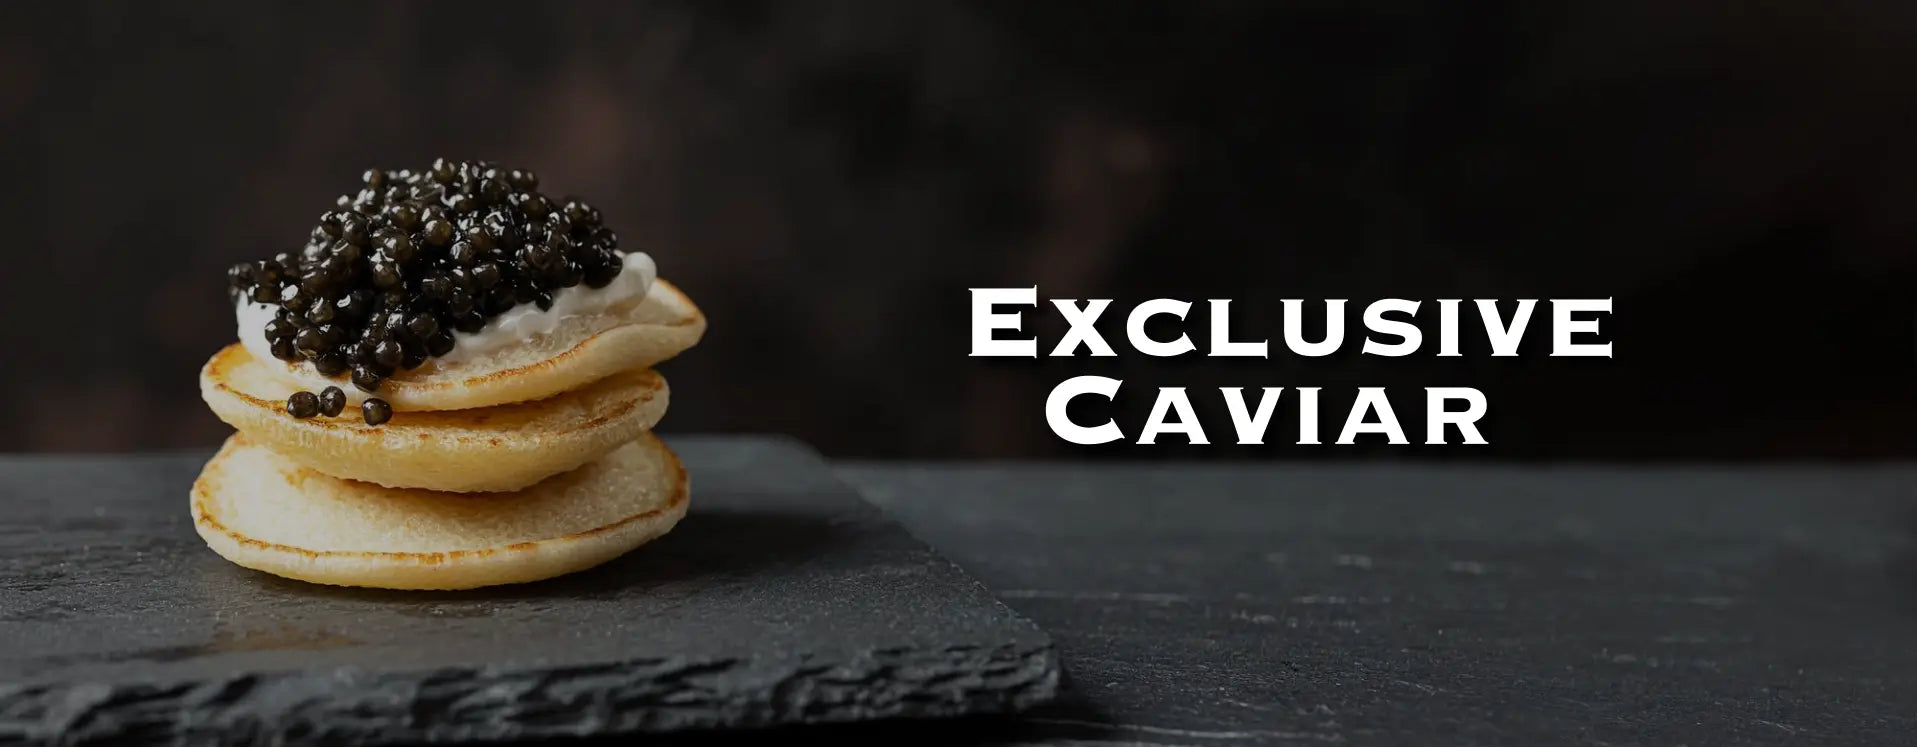 The most exclusive caviar